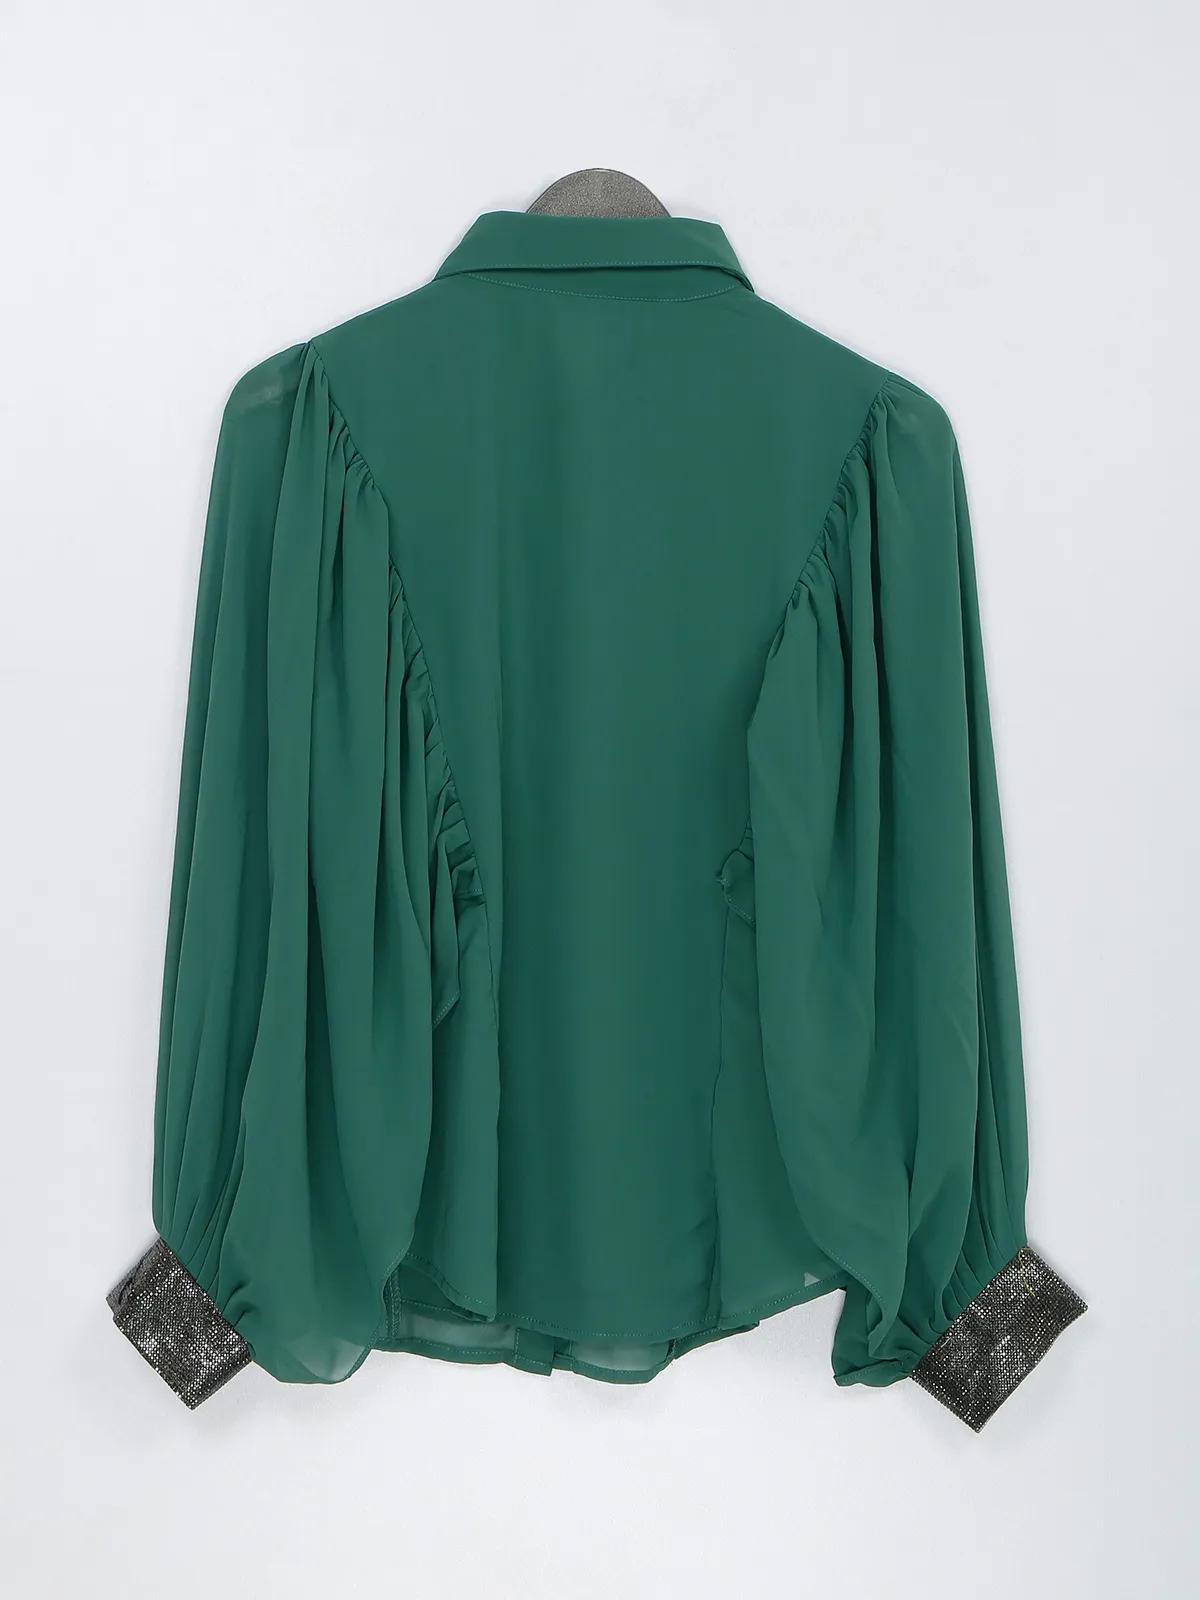 Teal green rayon cotton casual top